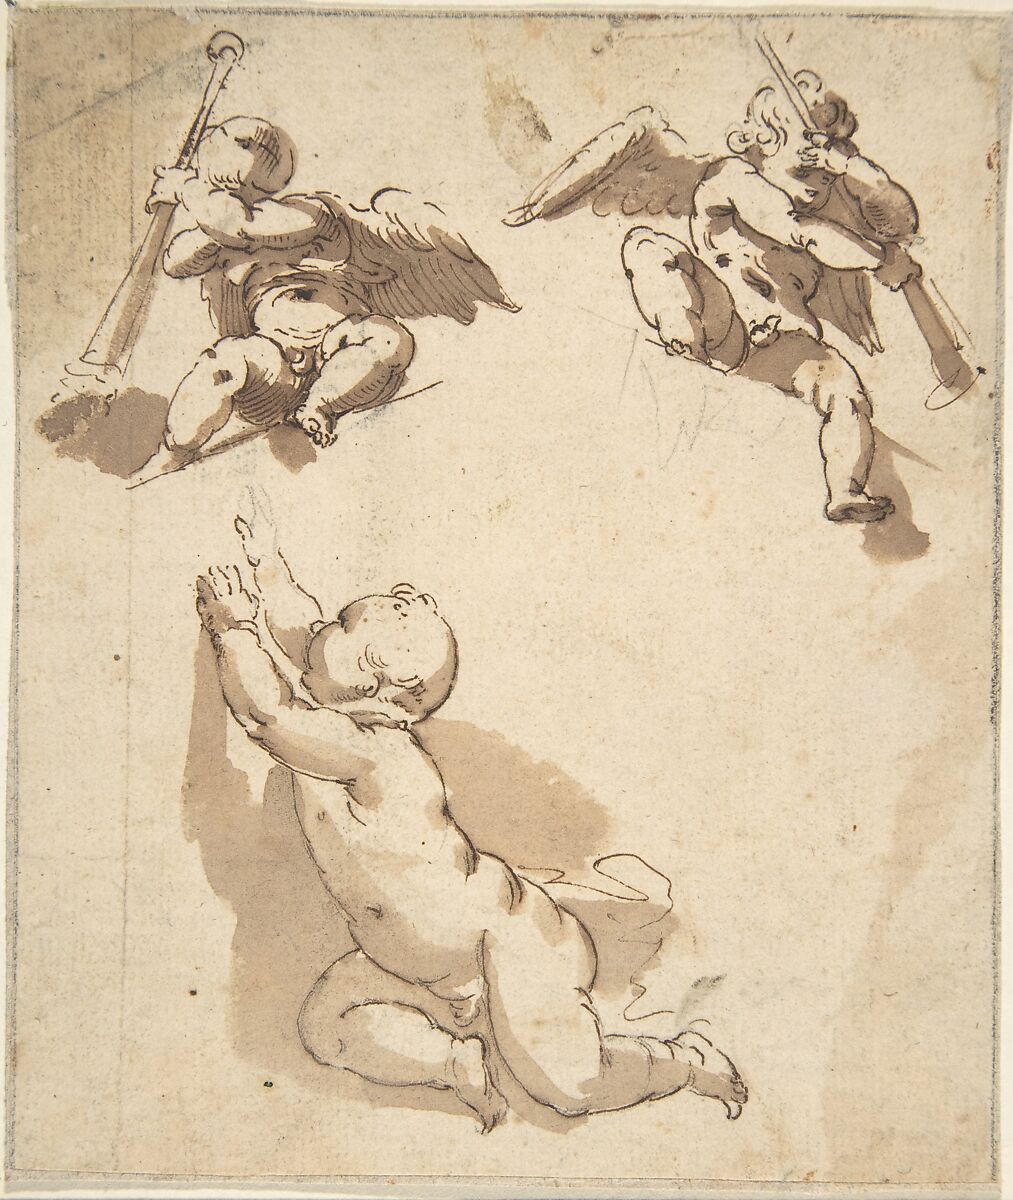 Study of a Child and Two Angels Holding Trumpets, Anonymous, Spanish, School of Seville, 17th century, Pen and dark brown ink with brush and brown wash over black chalk underdrawing. Composition outlined with black chalk. On light beige paper 